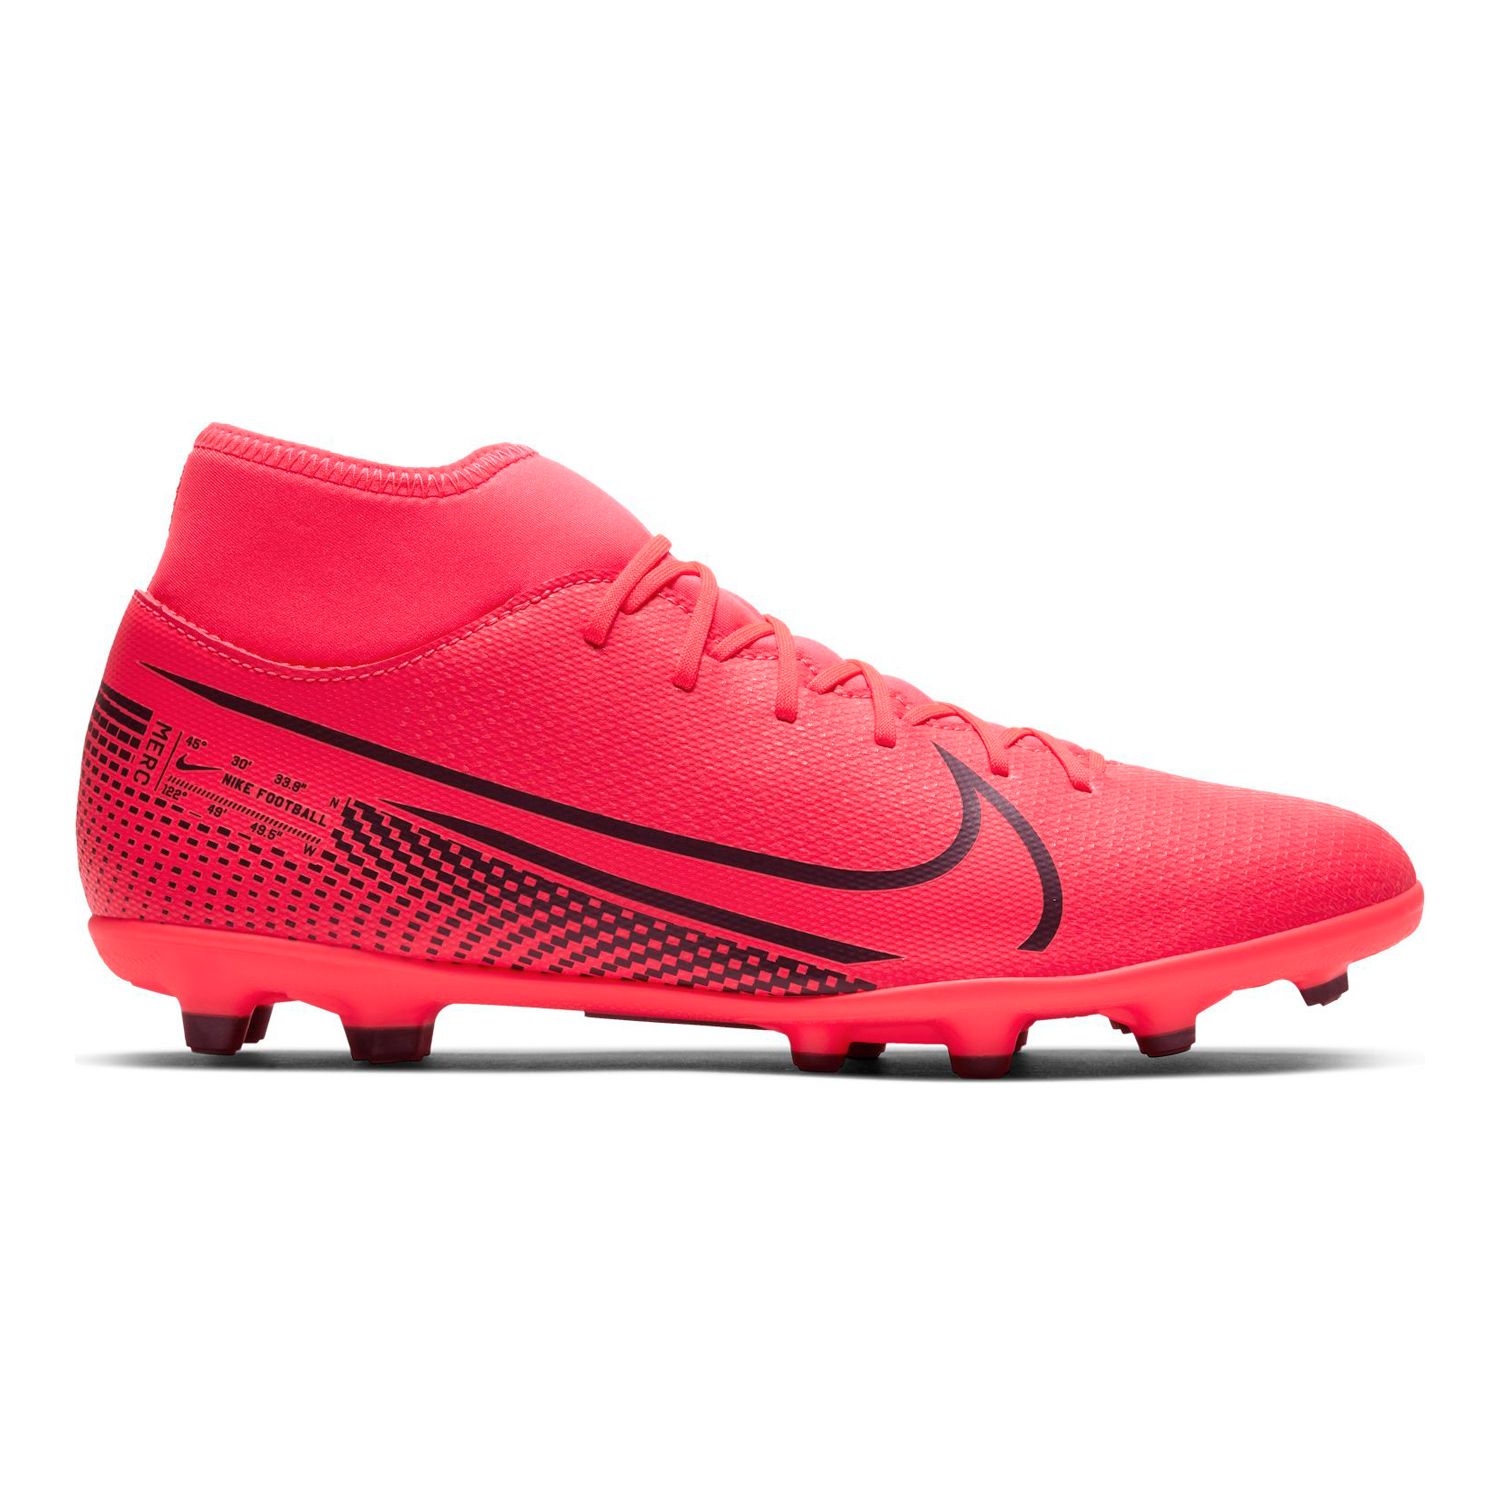 Nike Mercurial Superfly 7 Club MG Men's Multi-Ground Soccer Cleats